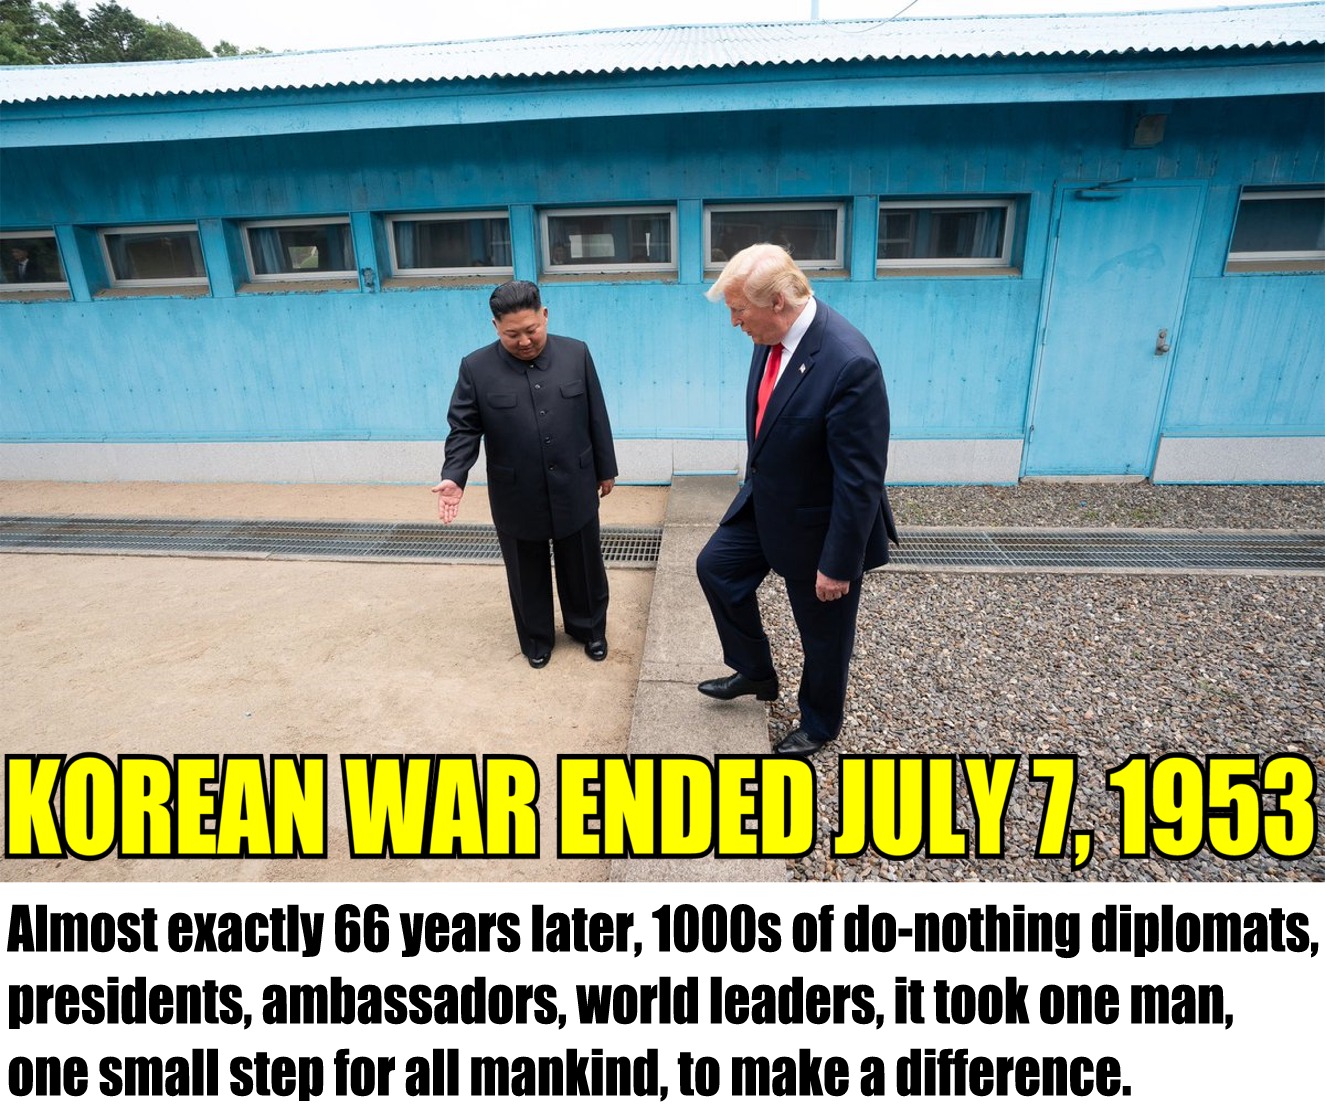 donald trump steps in north korea - Korean War Ended Almost exactly 66 years later, 1000s of donothing diplomats, presidents, ambassadors, world leaders, it took one man, one small step for all mankind, to make a difference.